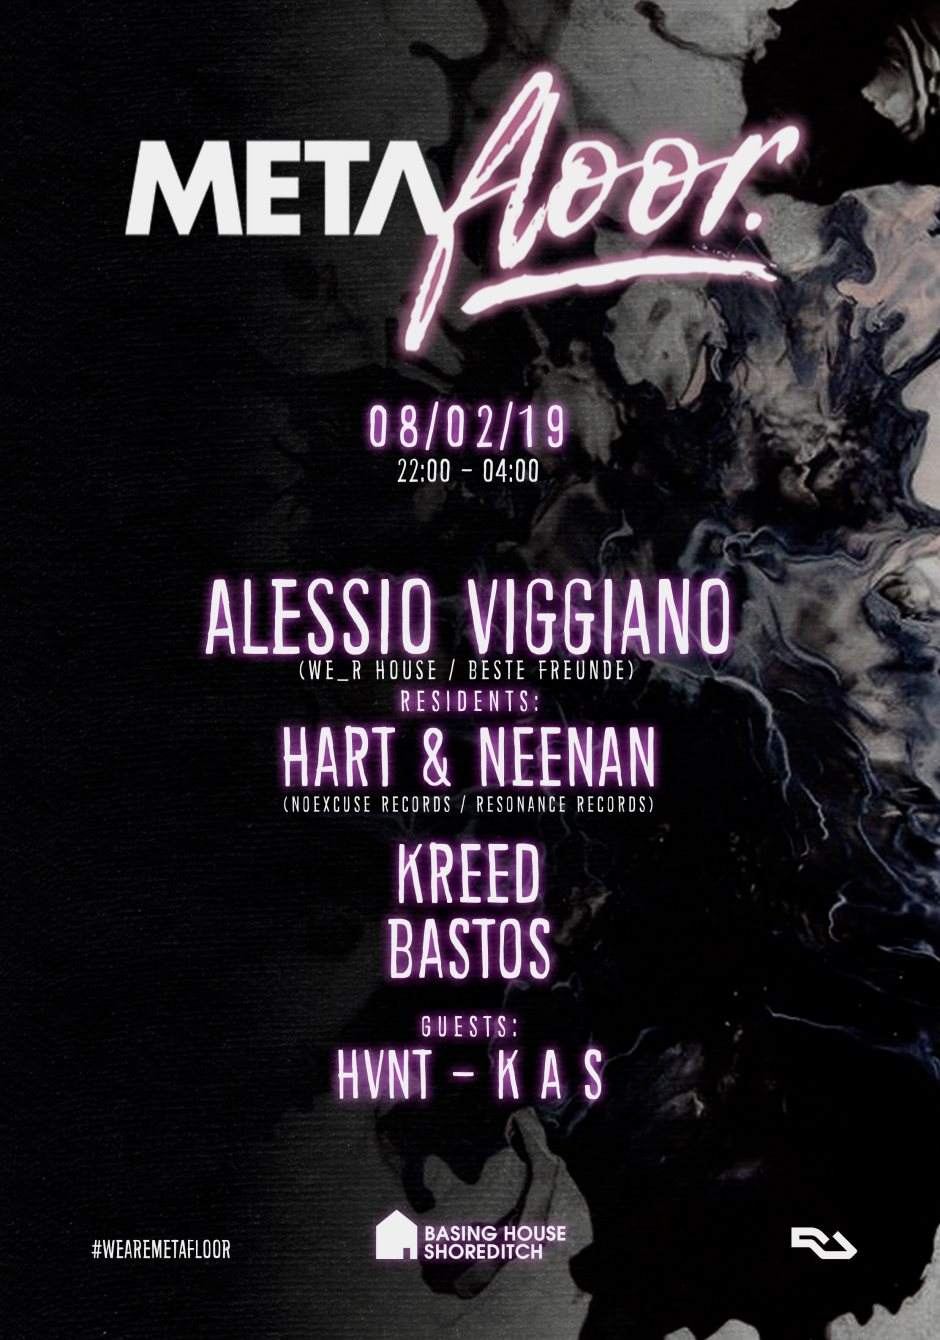 Metafloor - 2019 - with Alessio Viggiano (We_r House/ Beste Freunde), Residents & Guests - フライヤー表